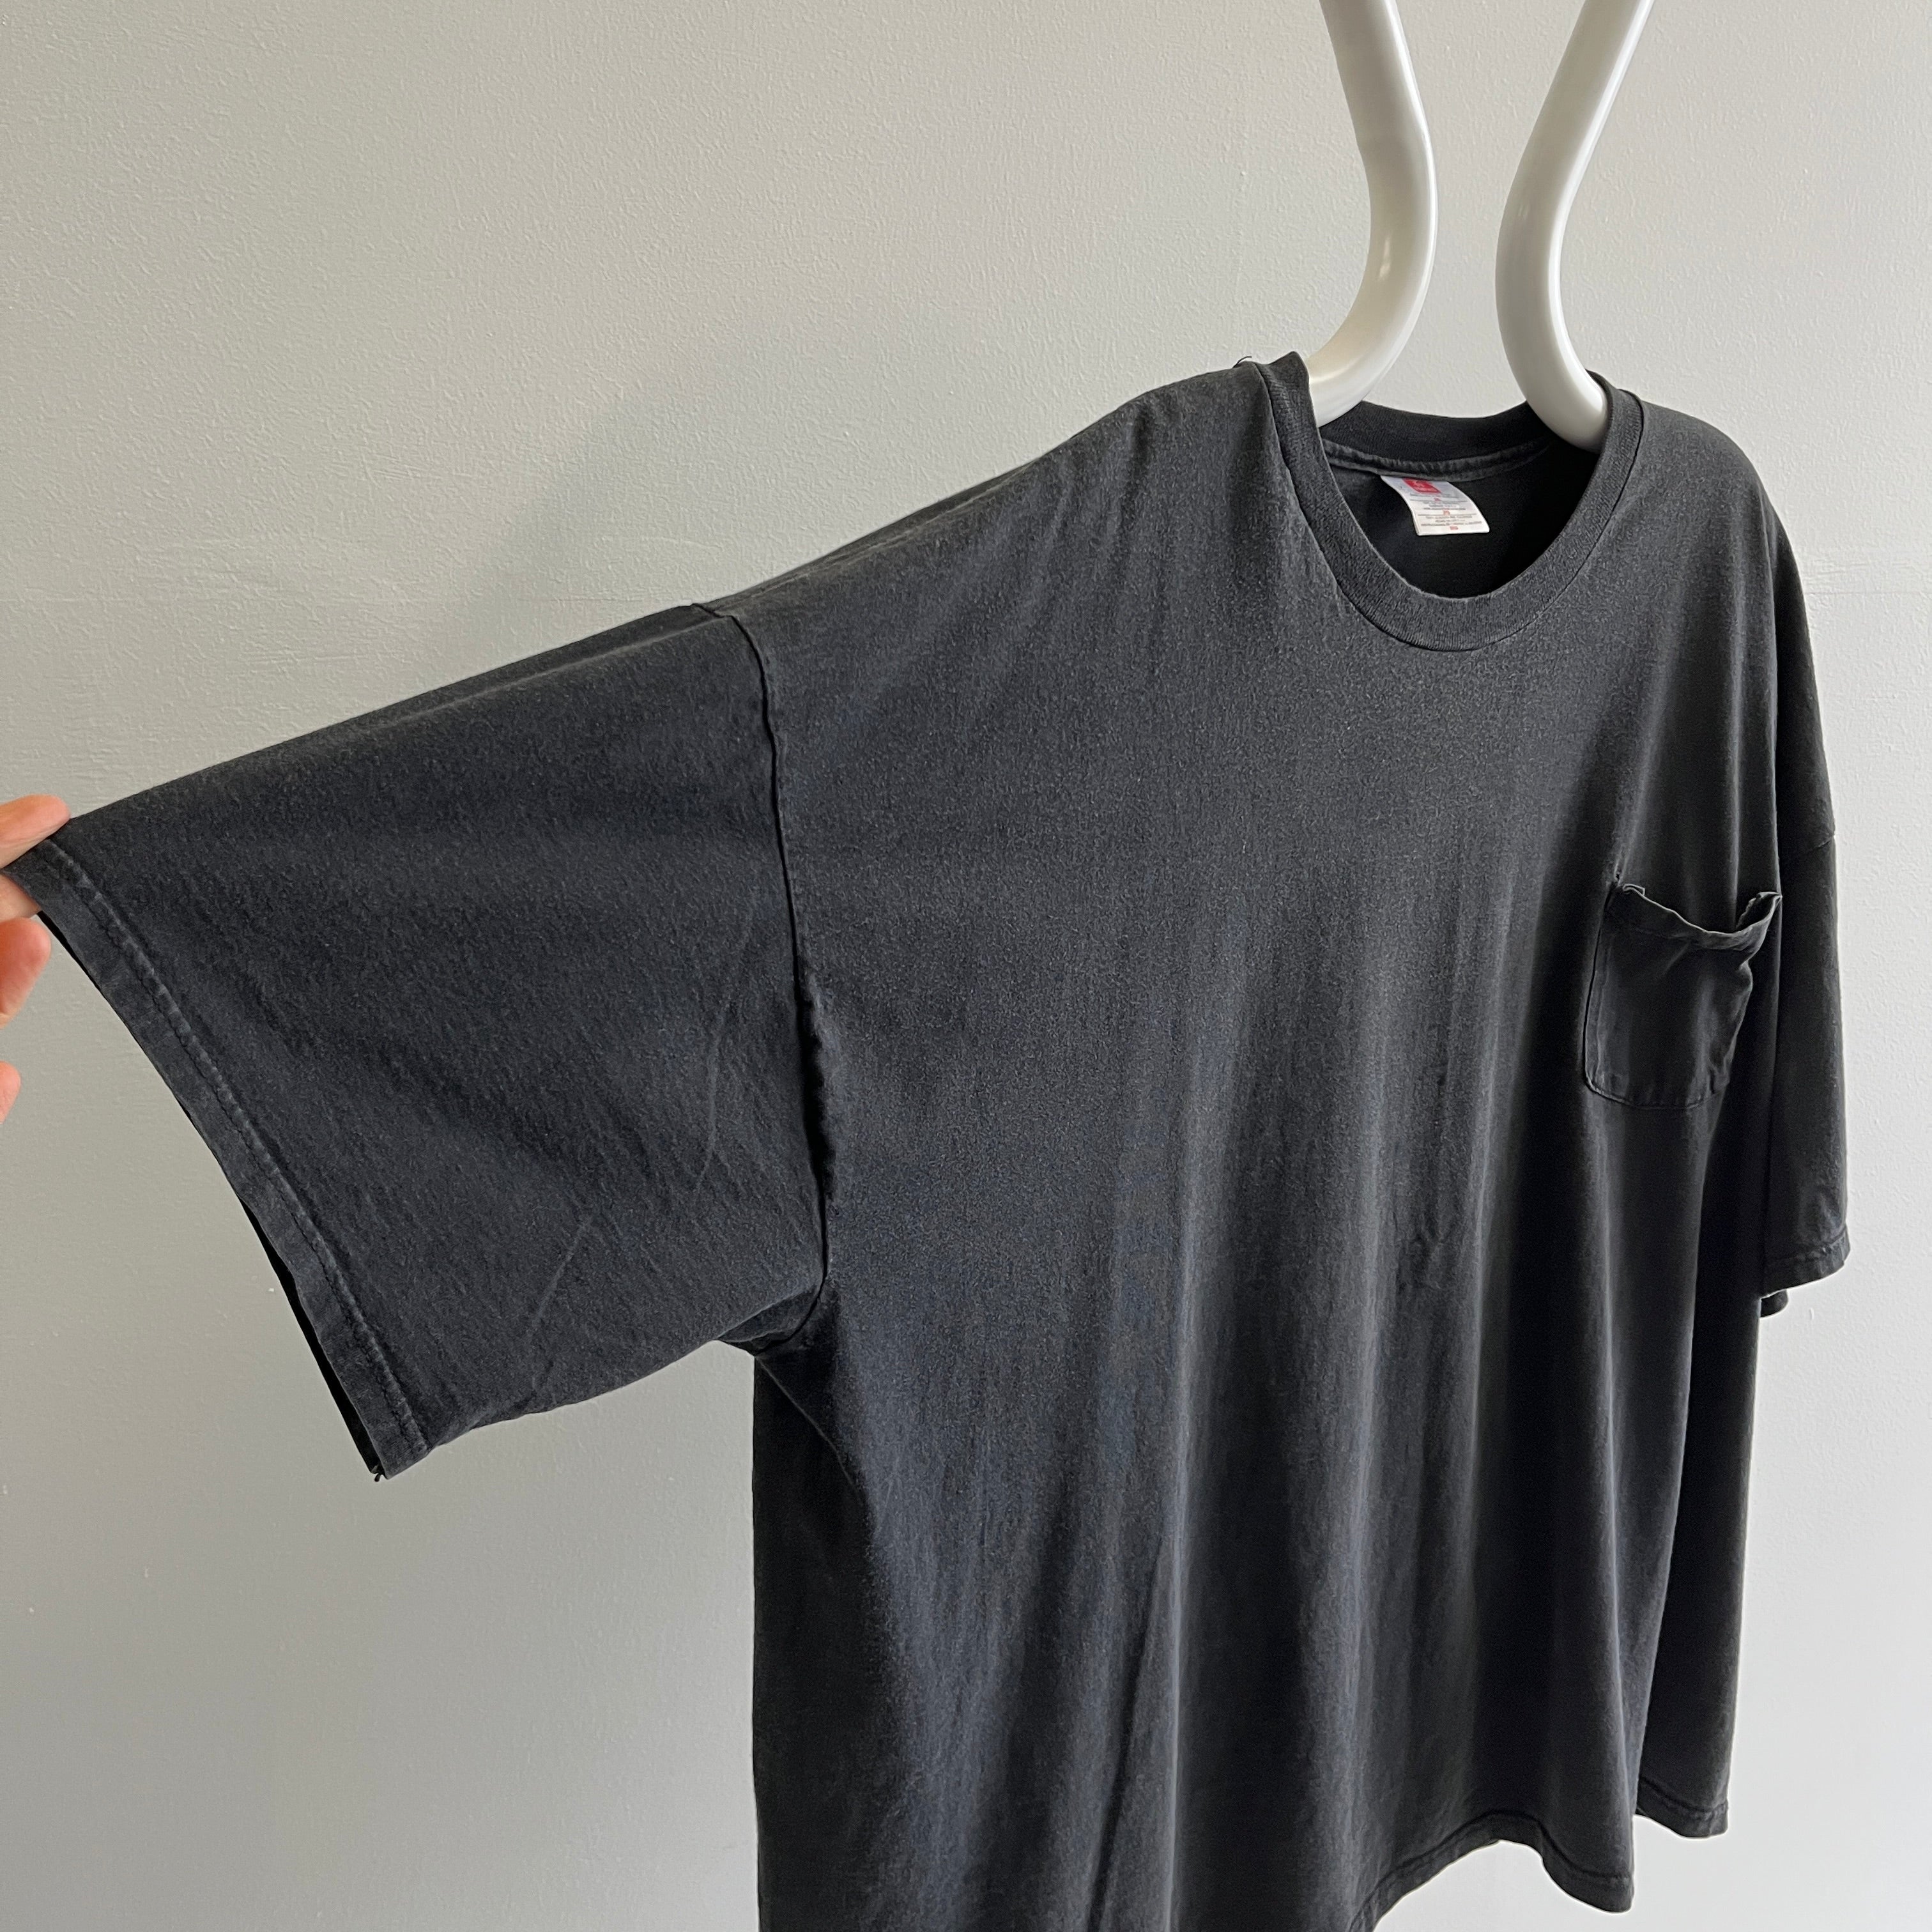 1990s Relaxed Fit Blank Black Pocket T-Shirt with an Incredible Drape